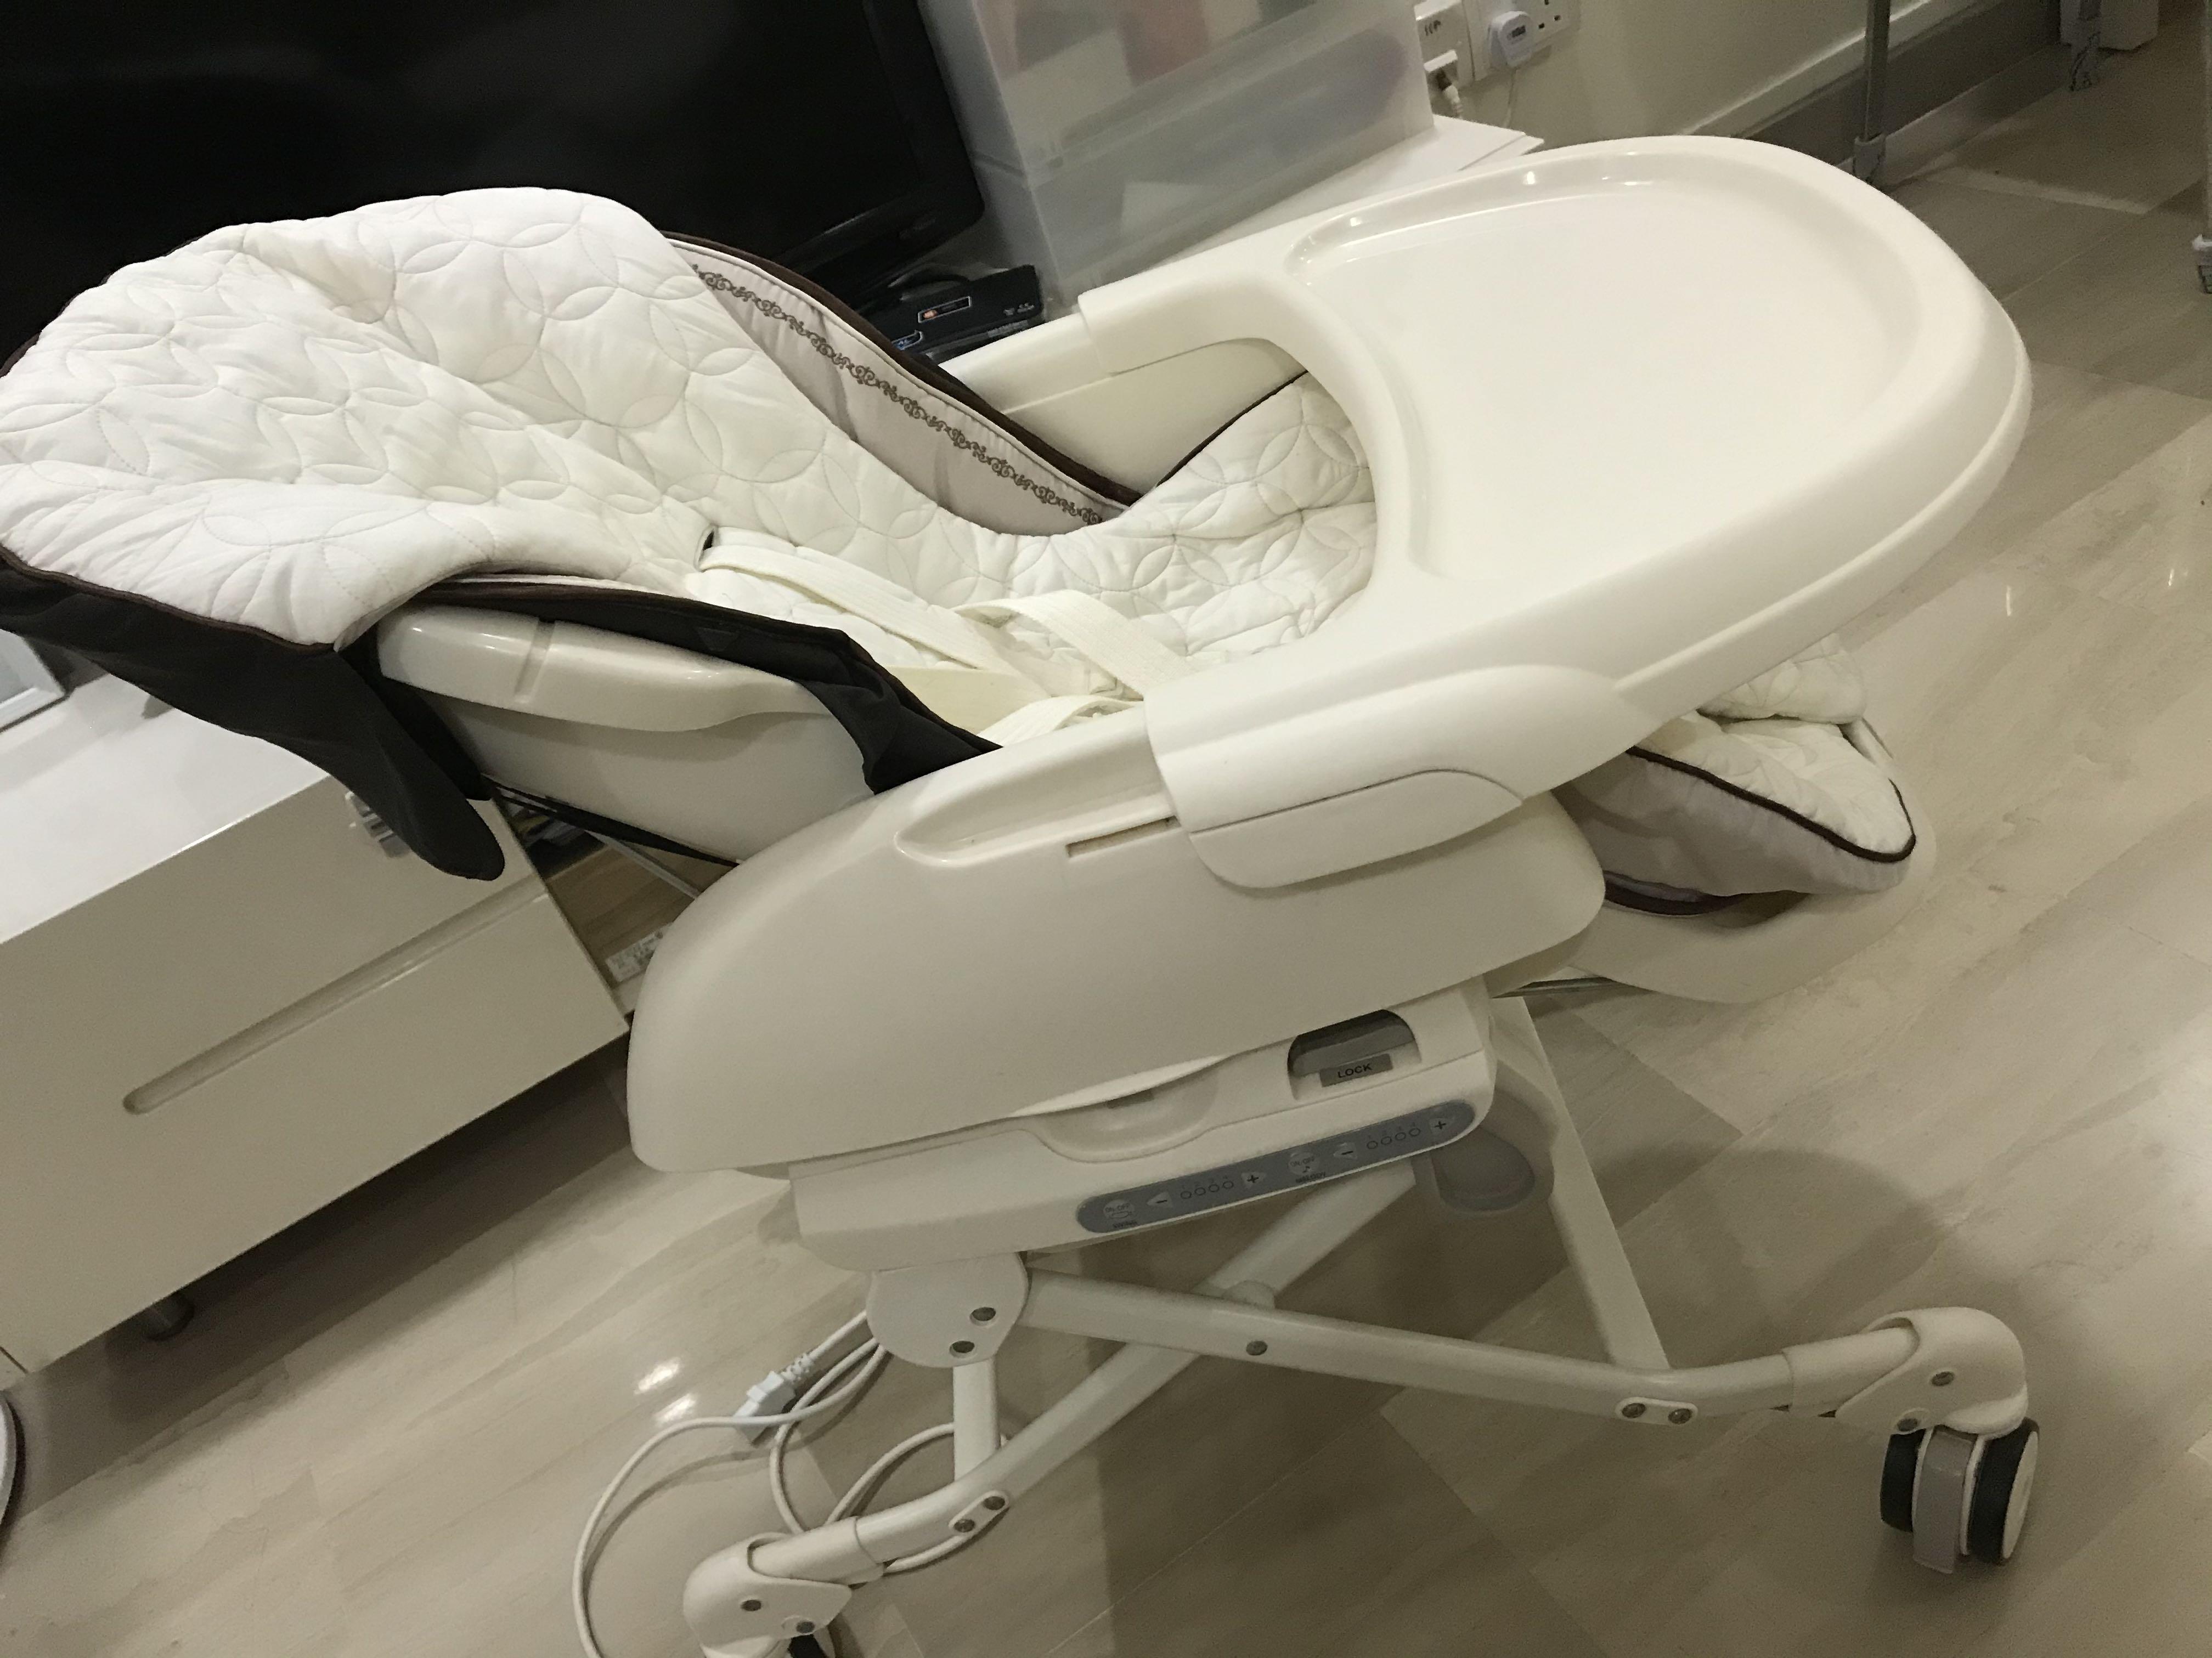 Combi Auto Swing Music High Chair Box Included Babies Kids Cots Cribs On Carousell